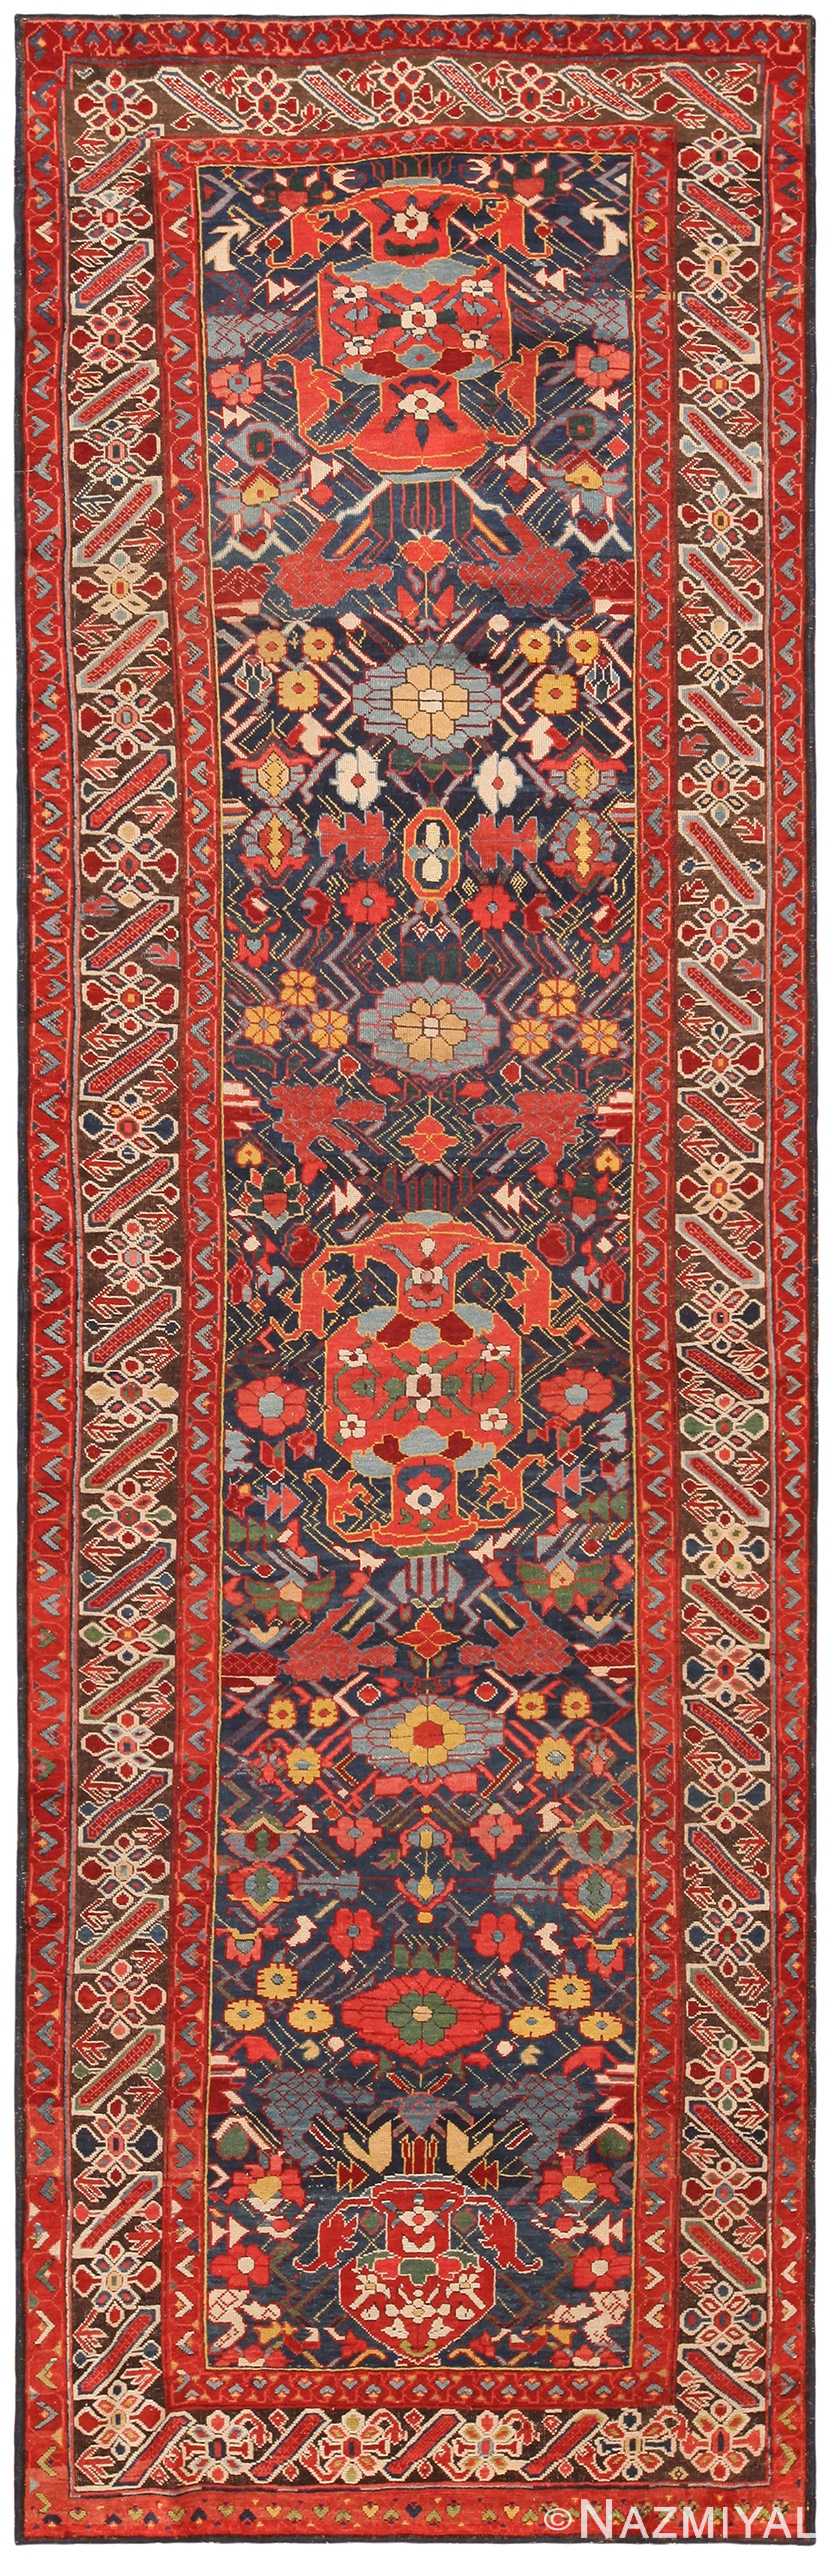 Marvelous Antique Caucasian Chi Chi Runner 71166 by Nazmiyal Antique Rugs